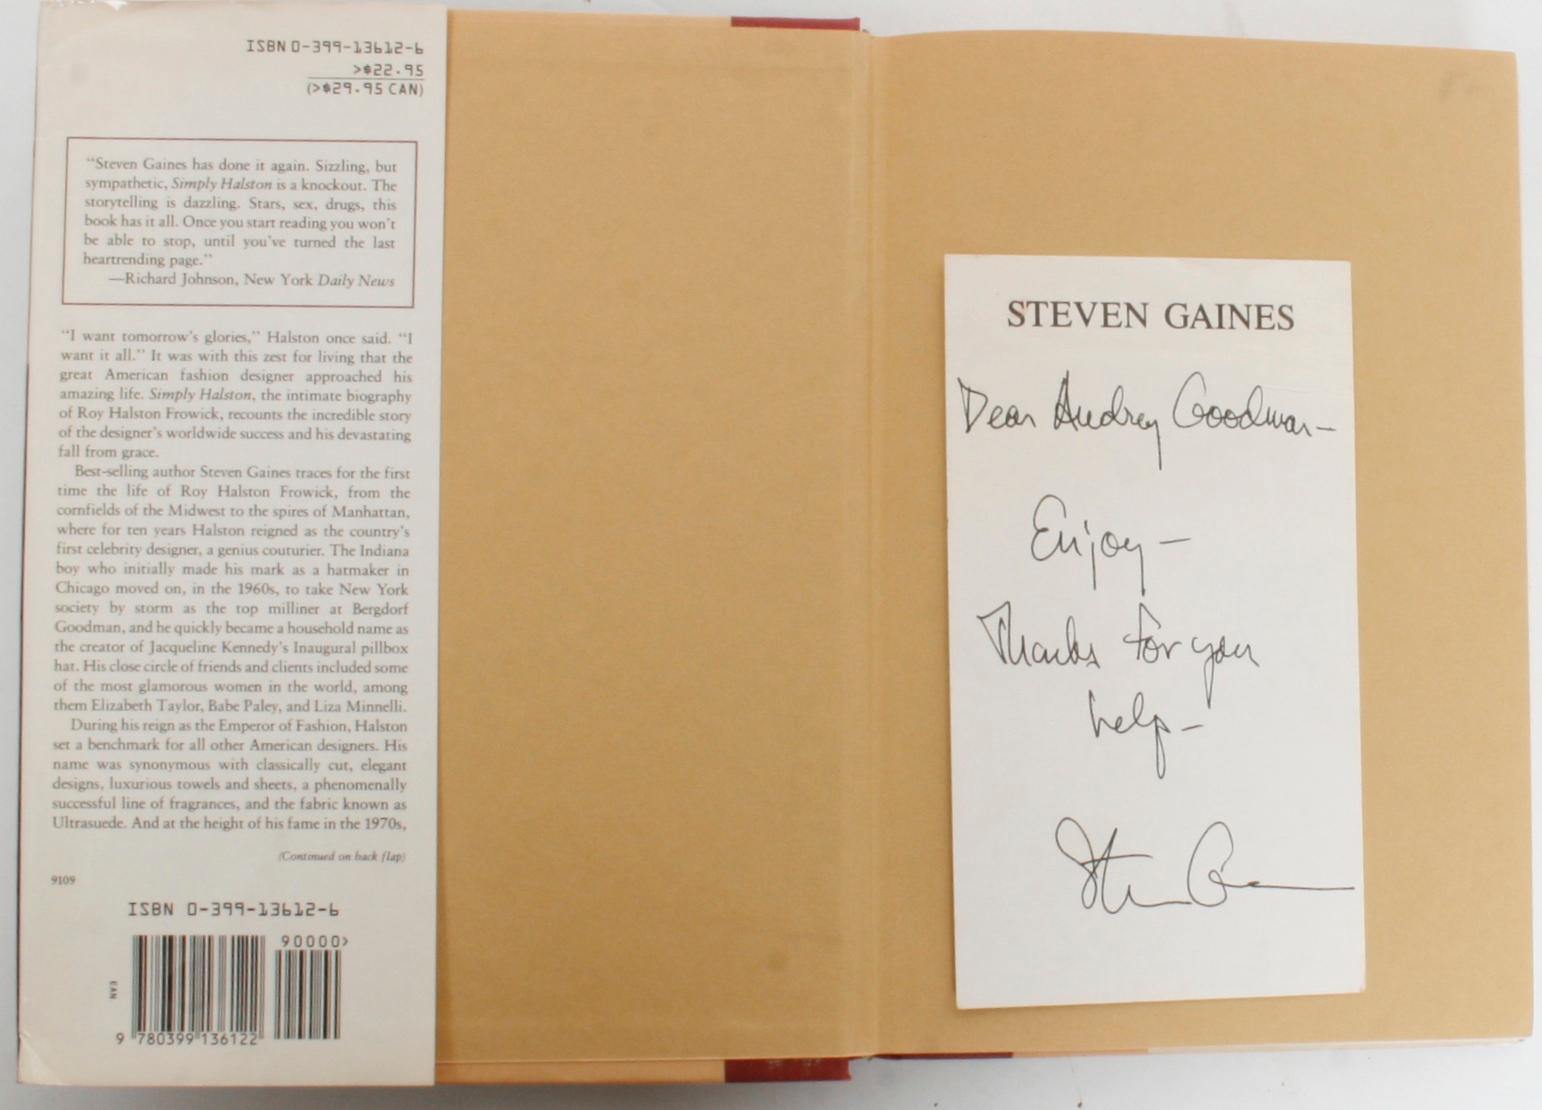 Simply Halston, The Untold Story by Steven Gaines. New York: G.P. Putnam's Sons, 1991. Signed first edition hardcover with dust jacket. 320 pp. An intimate biography of the Halston's life from the designer's worldwide success to his devastating fall